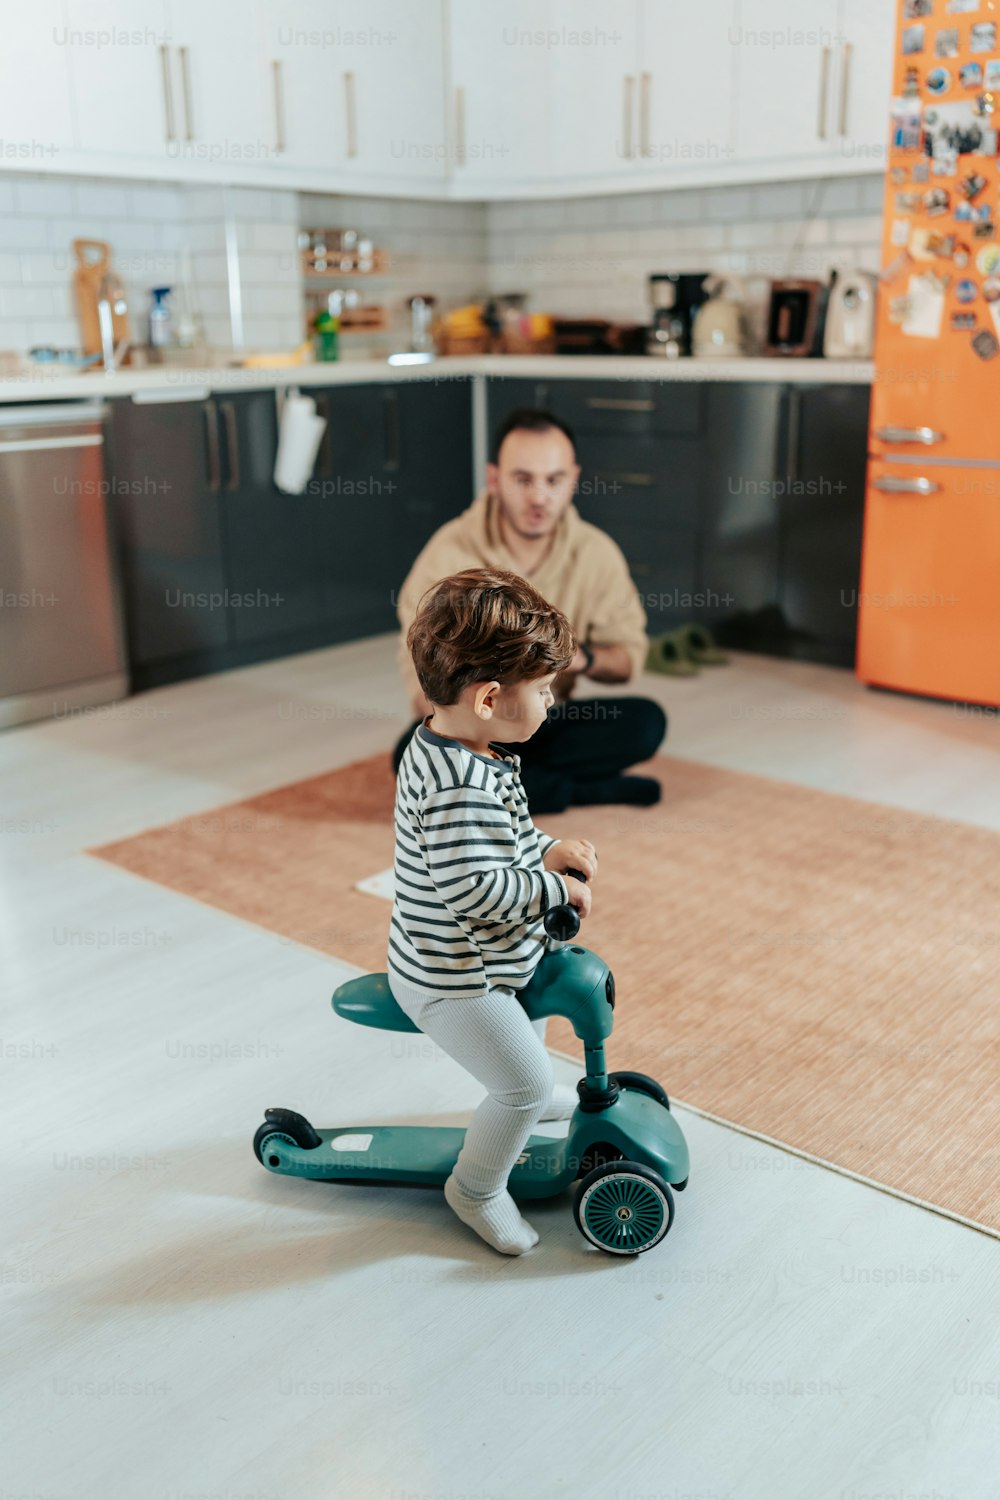 a man and a little girl riding a scooter in a kitchen